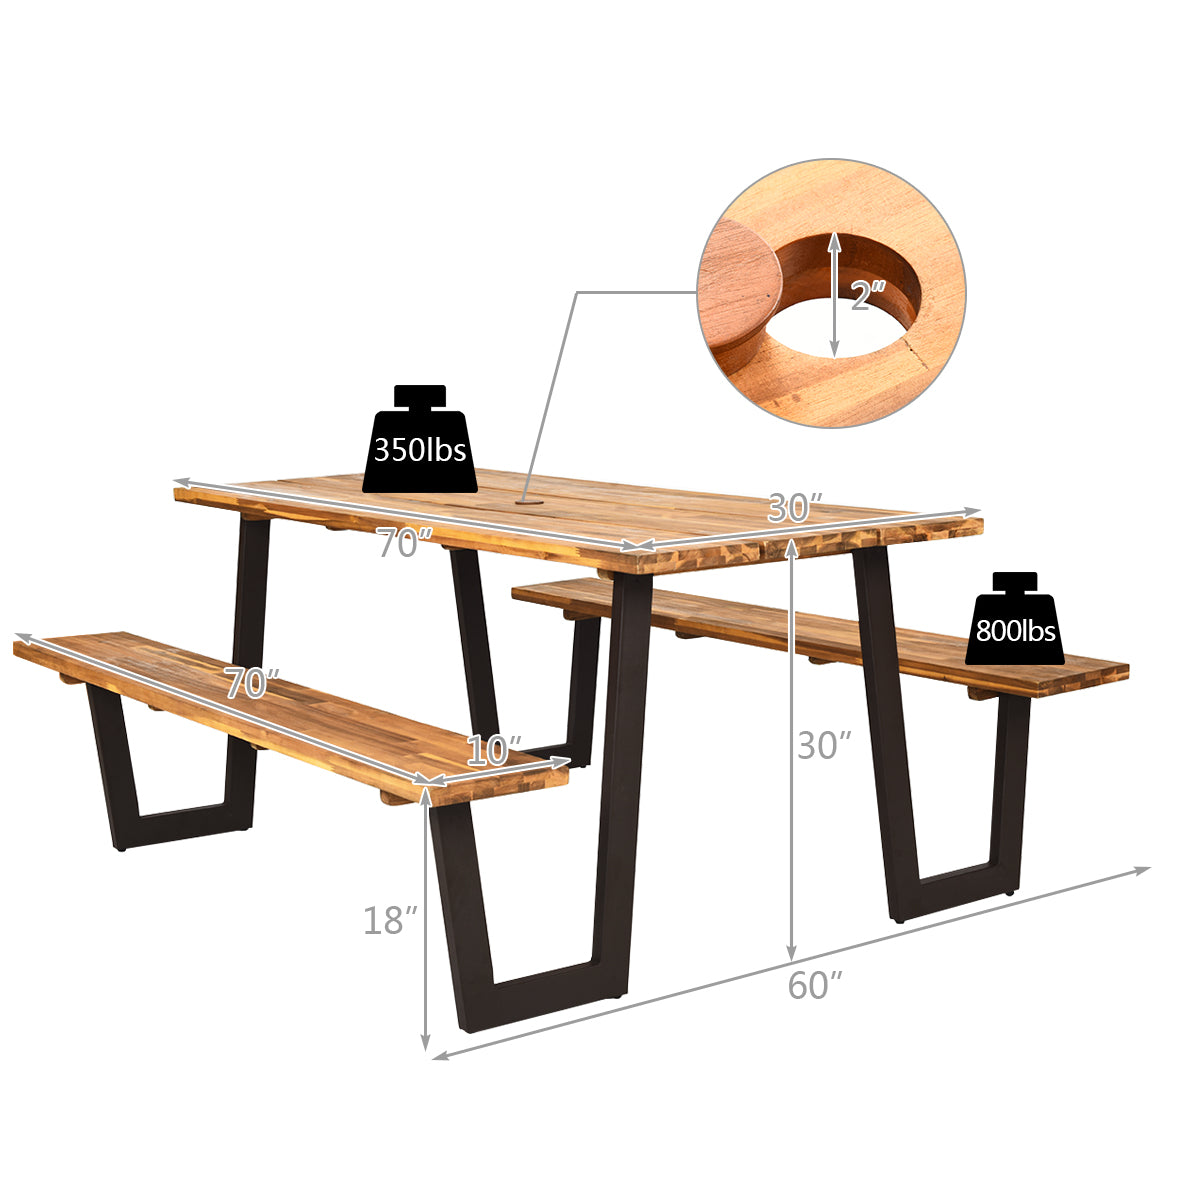 Picnic Table Bench Set with Umbrella Hole